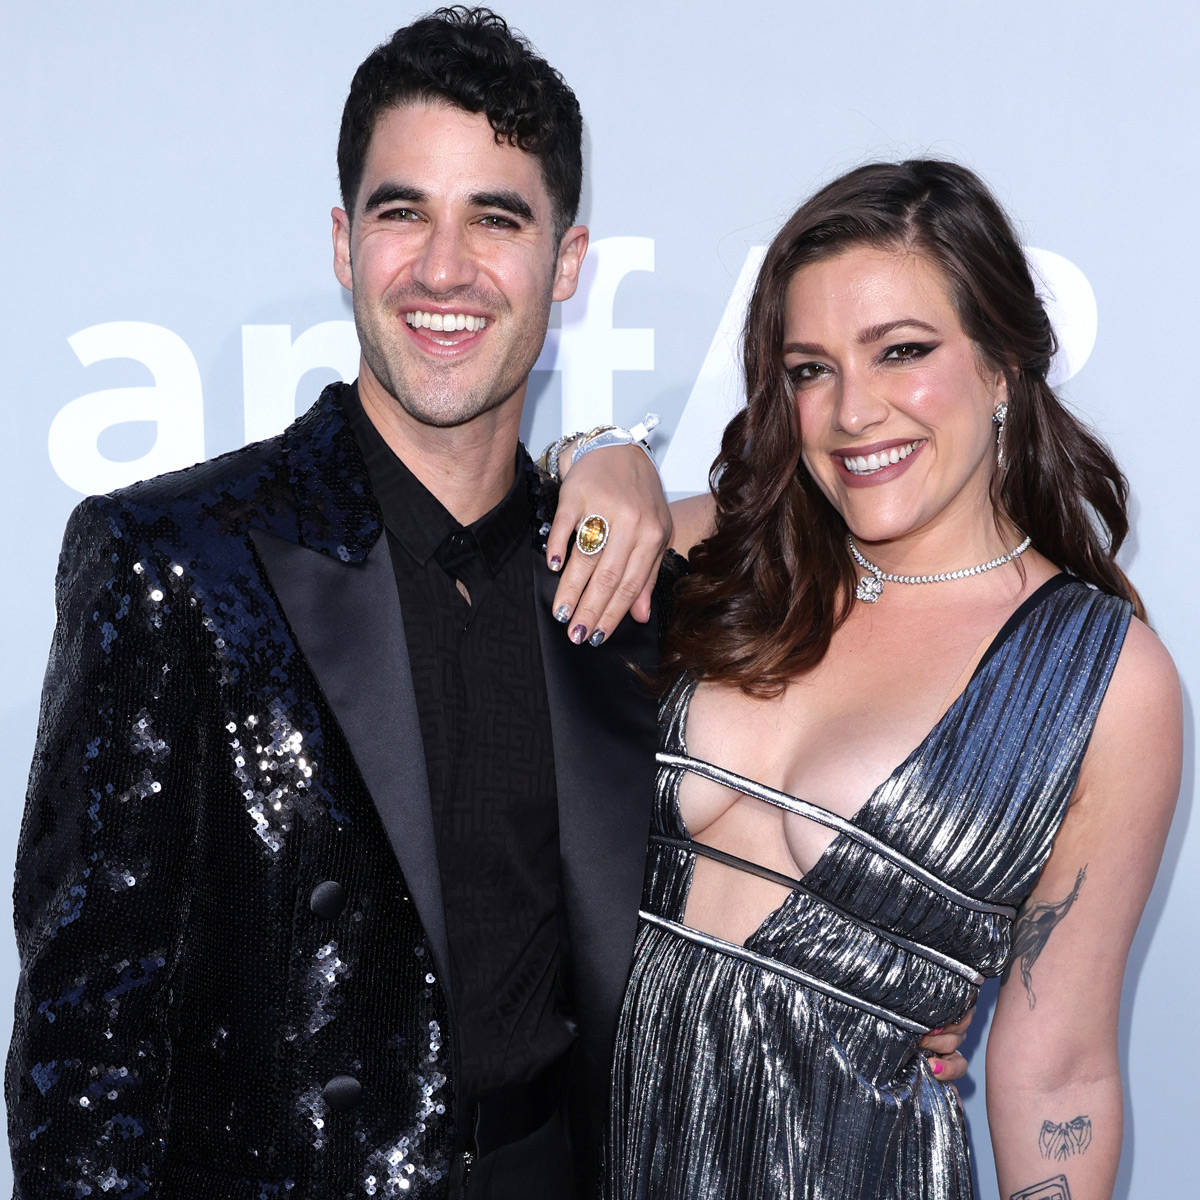 Glee’s Darren Criss and Wife Mia Expecting Baby No. 2 - WireFan - Your ...